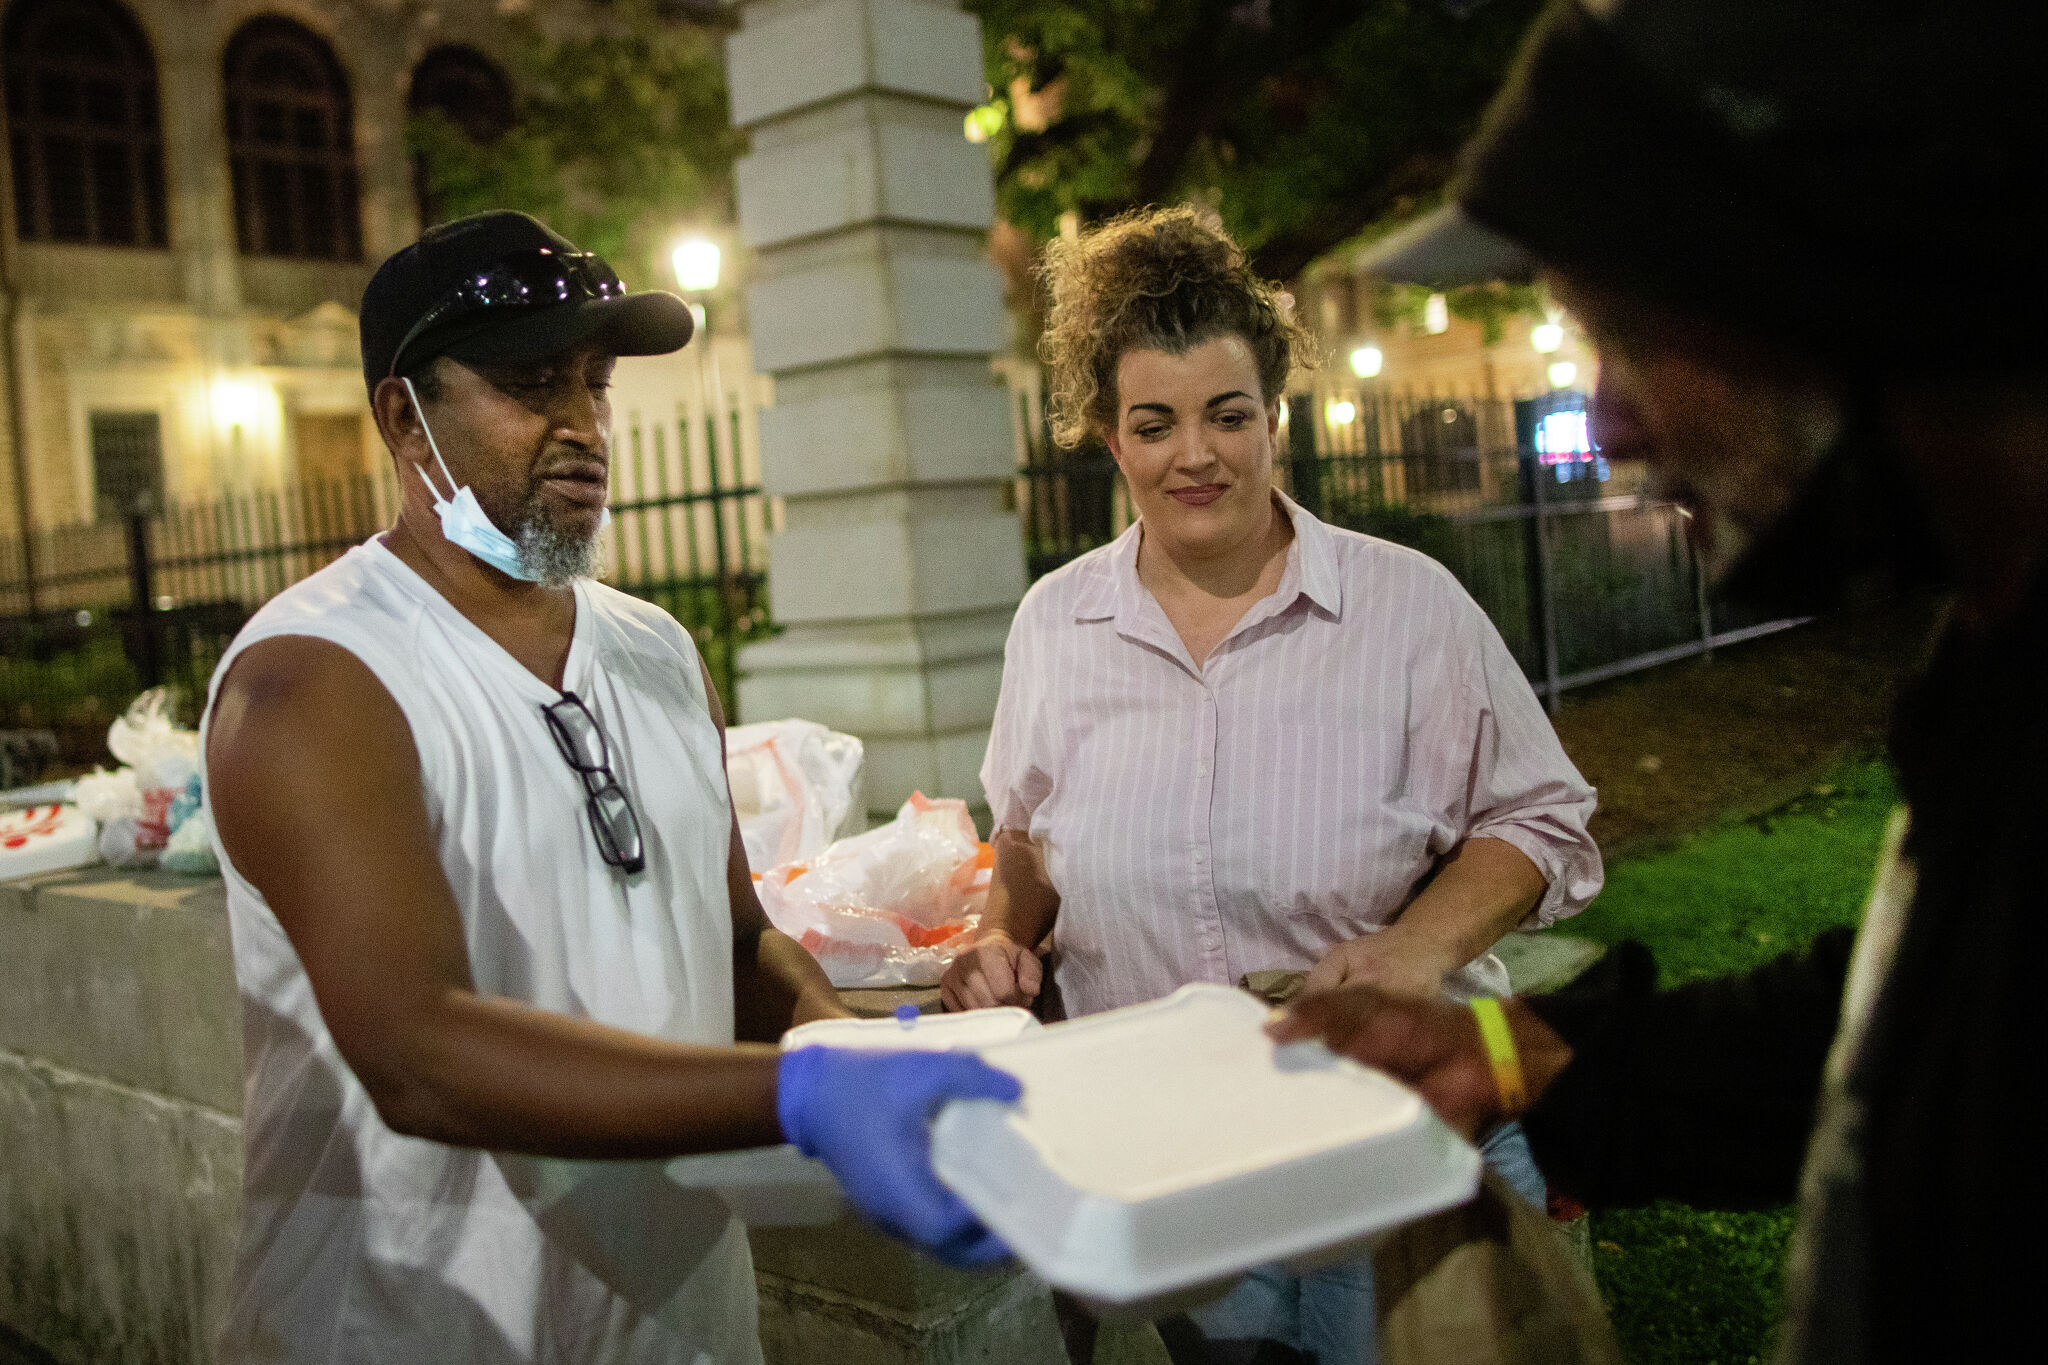 Houston police threaten to arrest volunteers who feed the homeless